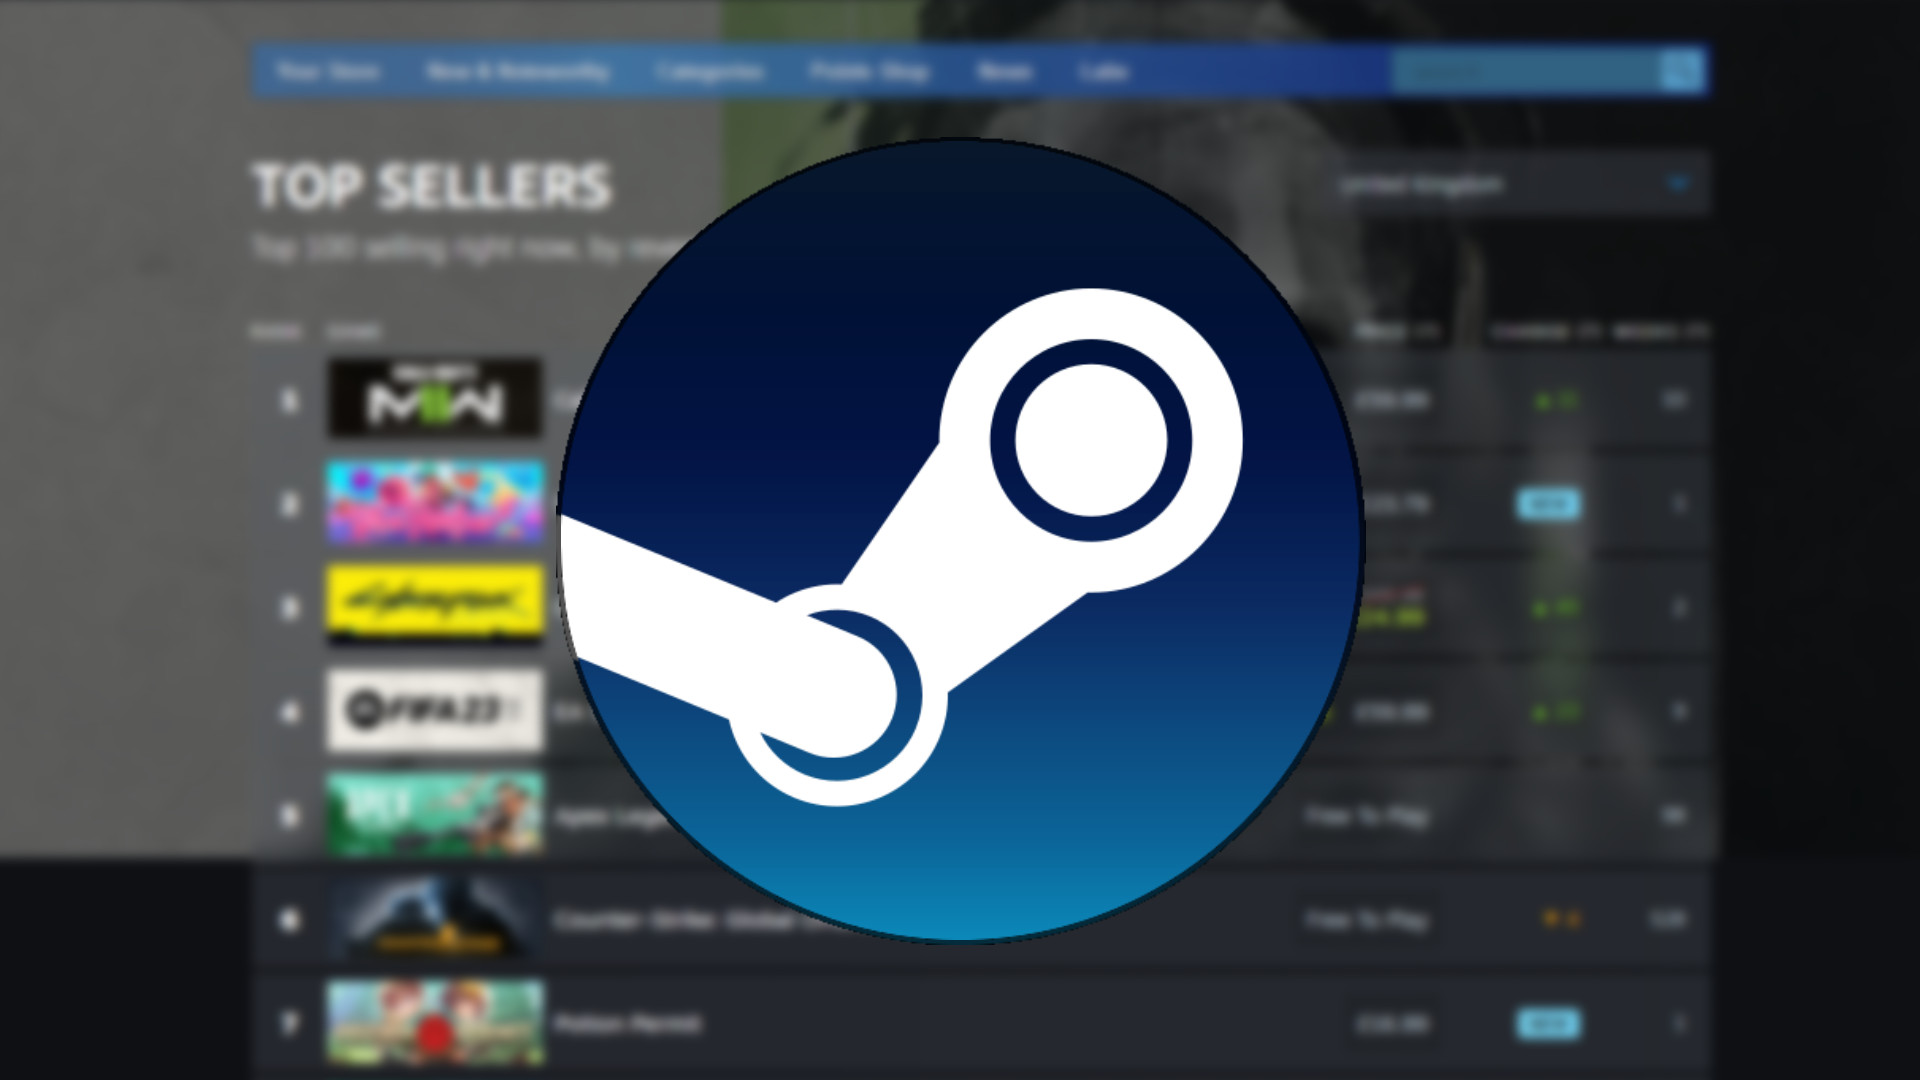 PlayStation tops the Steam charts